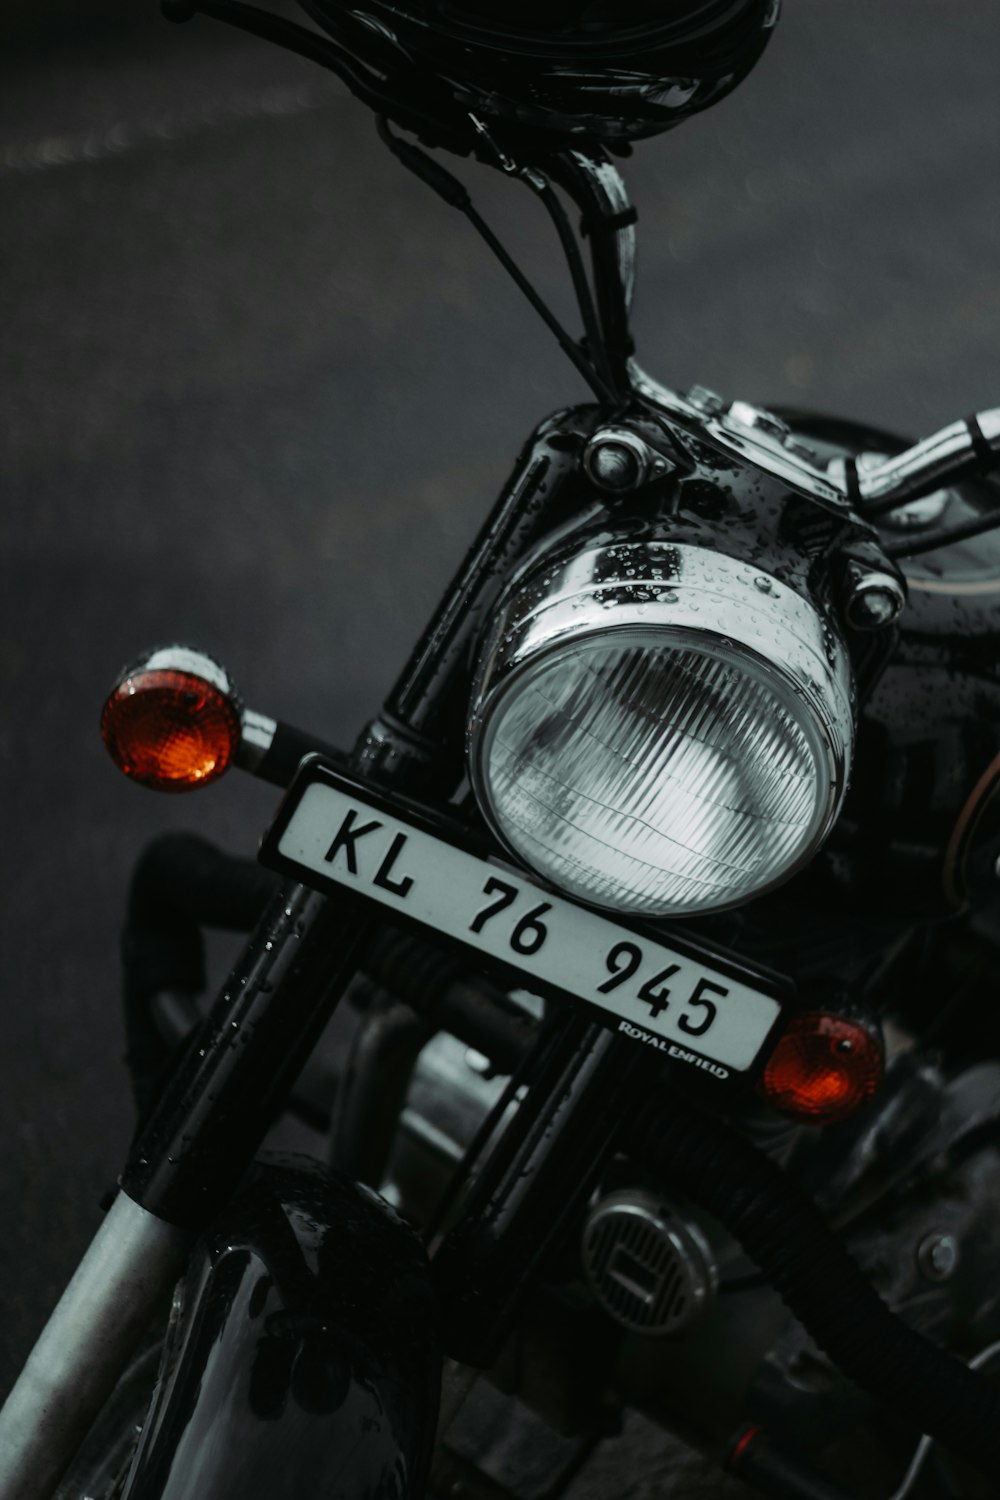 black and silver motorcycle with red light